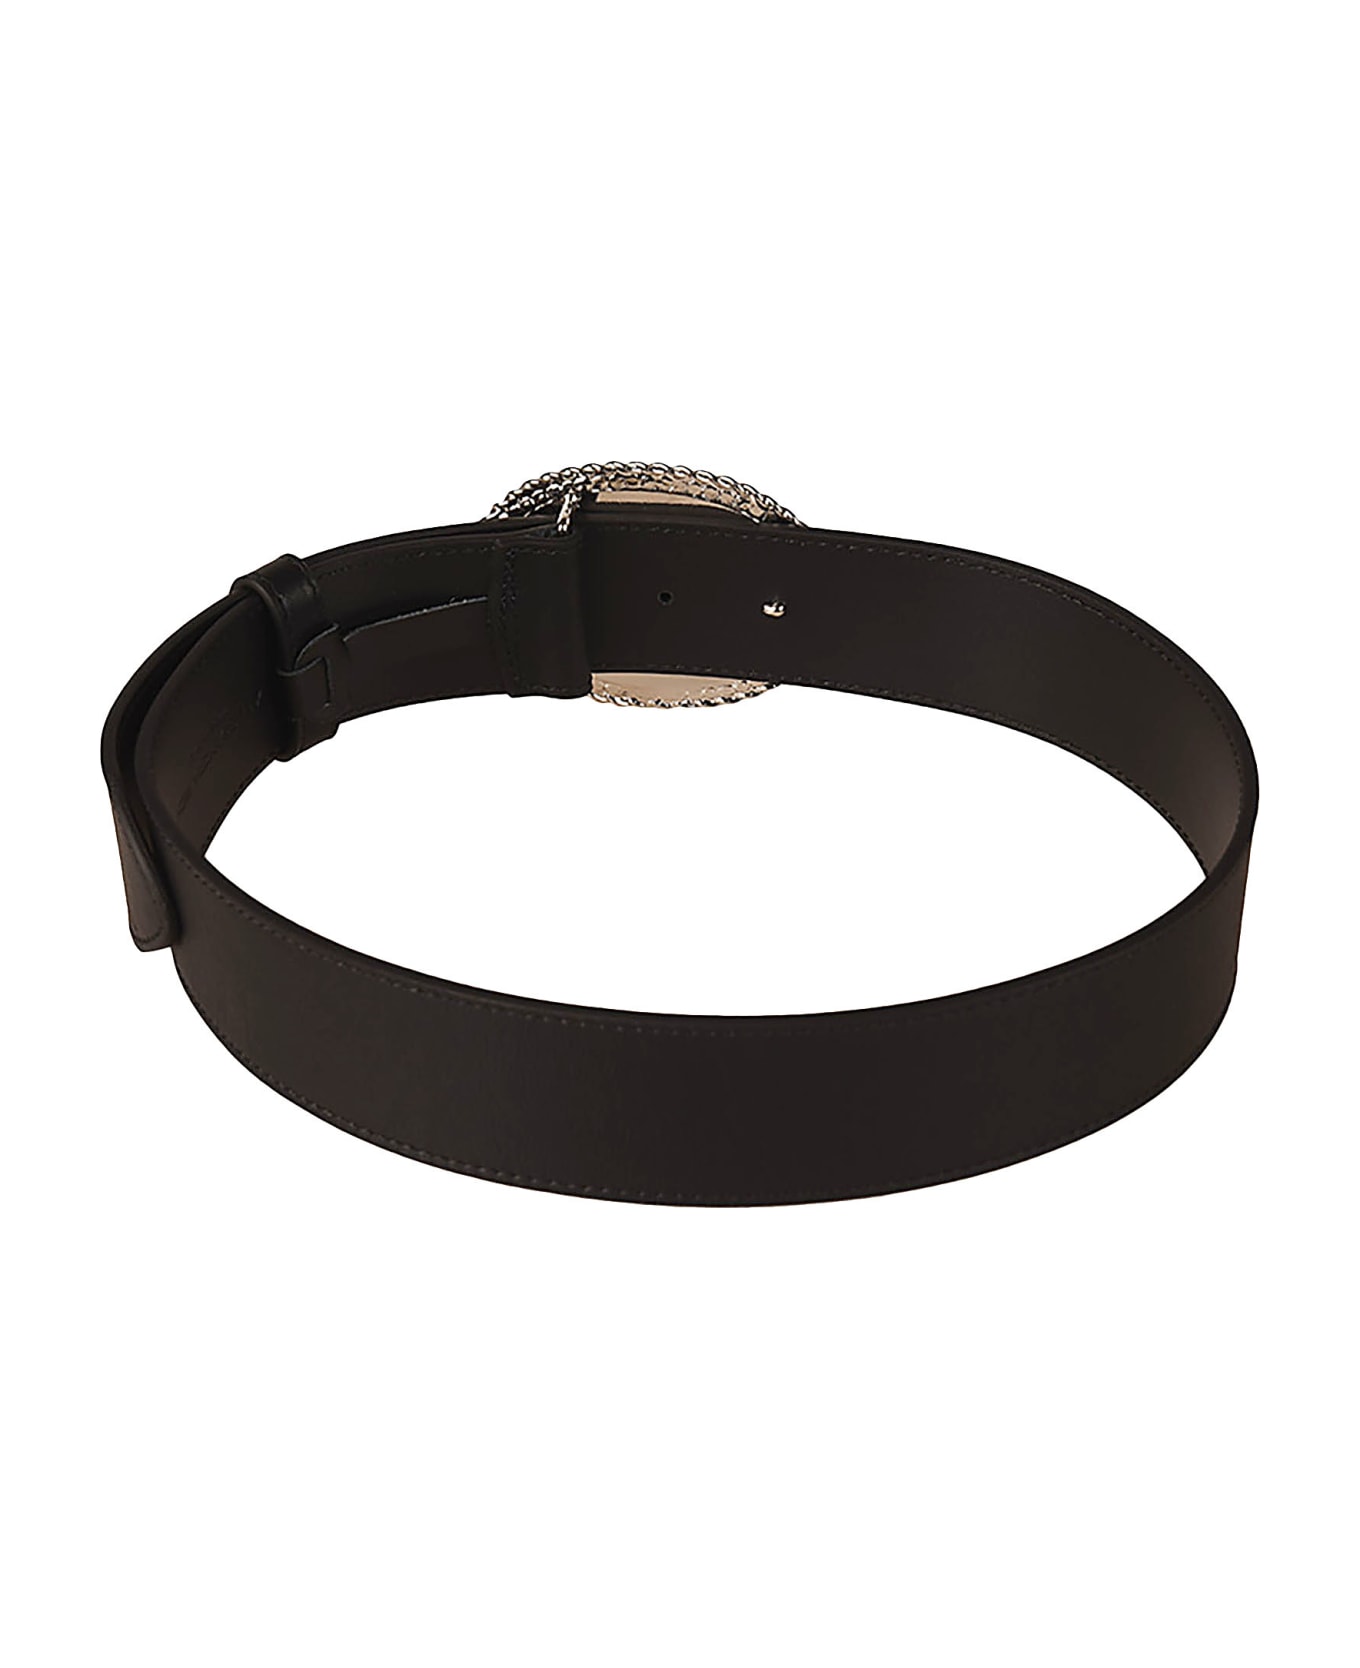 Alessandra Rich Oval Buckle Pearl Detail Leather Belt - Black/Silver